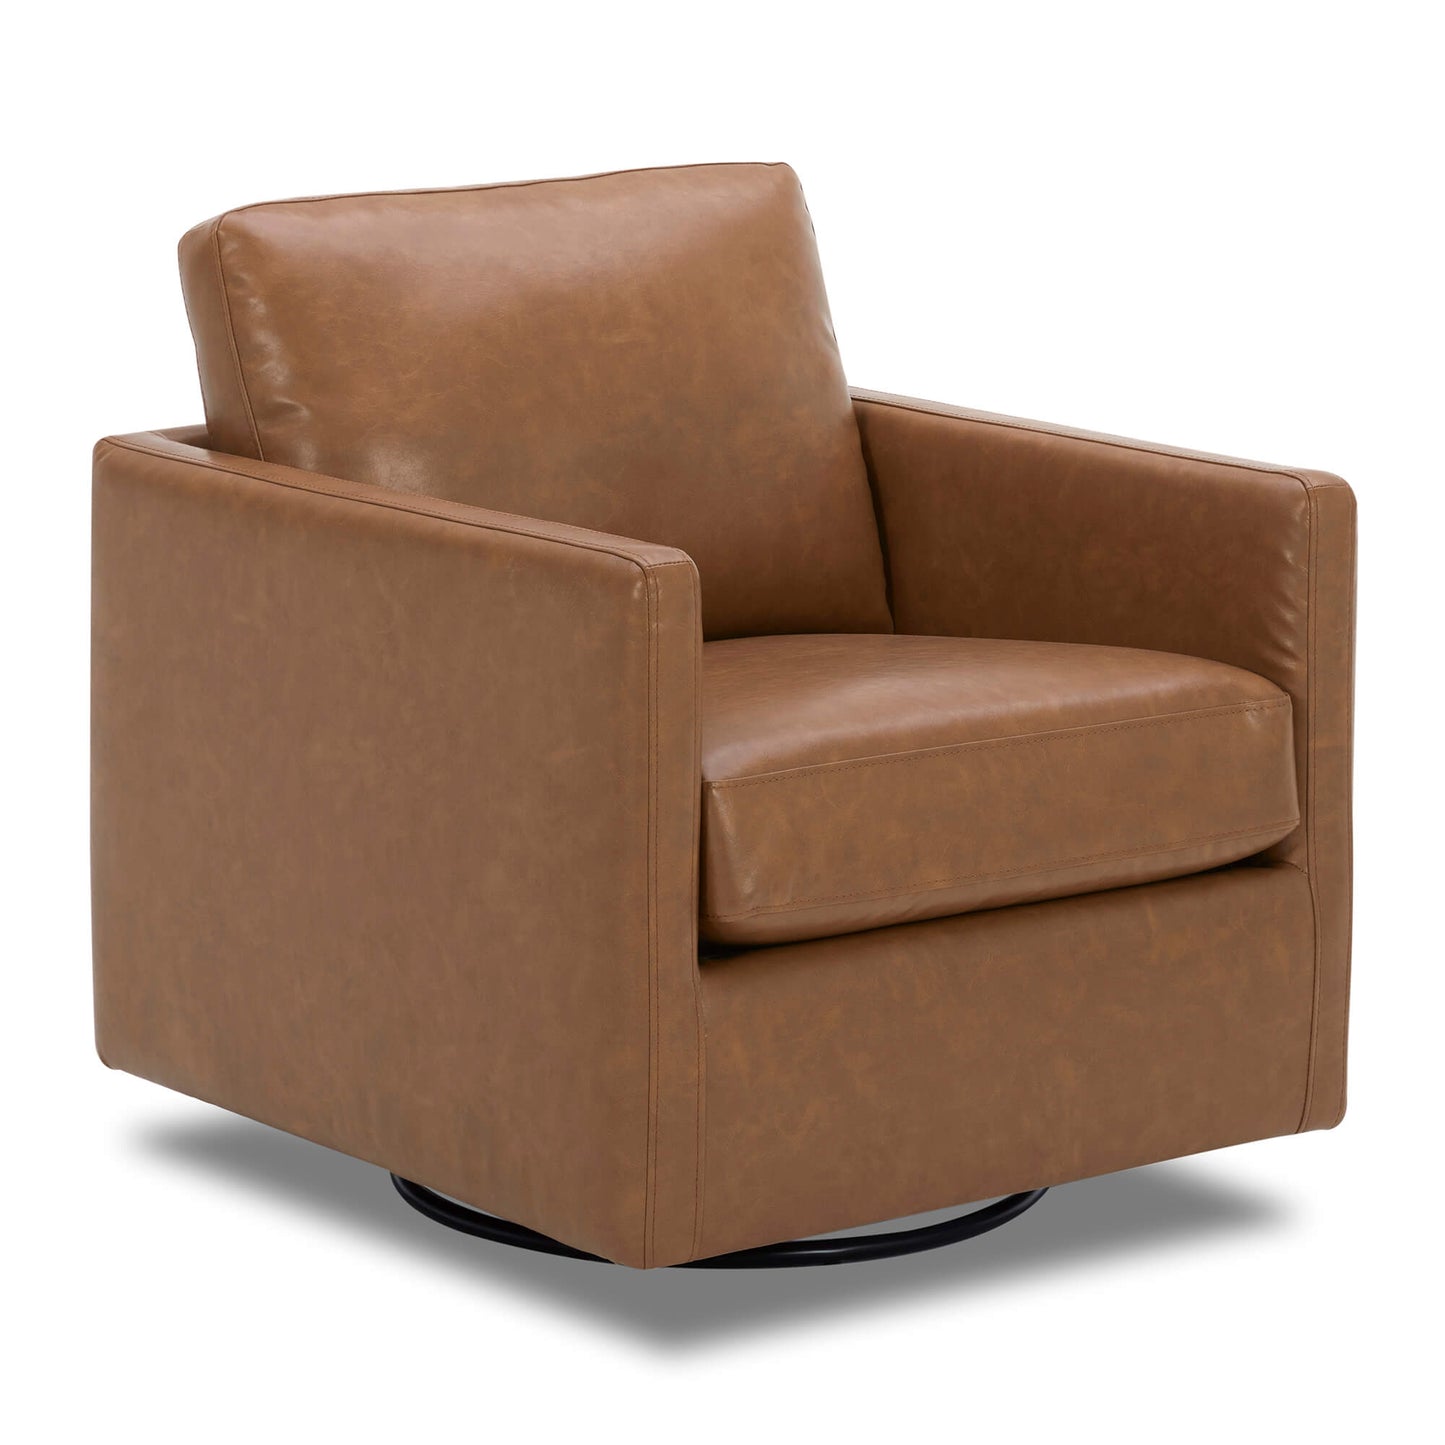 CHITA LIVING-Emma Contemporary Swivel Armchair Accent Chair-Accent Chair-Faux Leather-Saddle Brown-